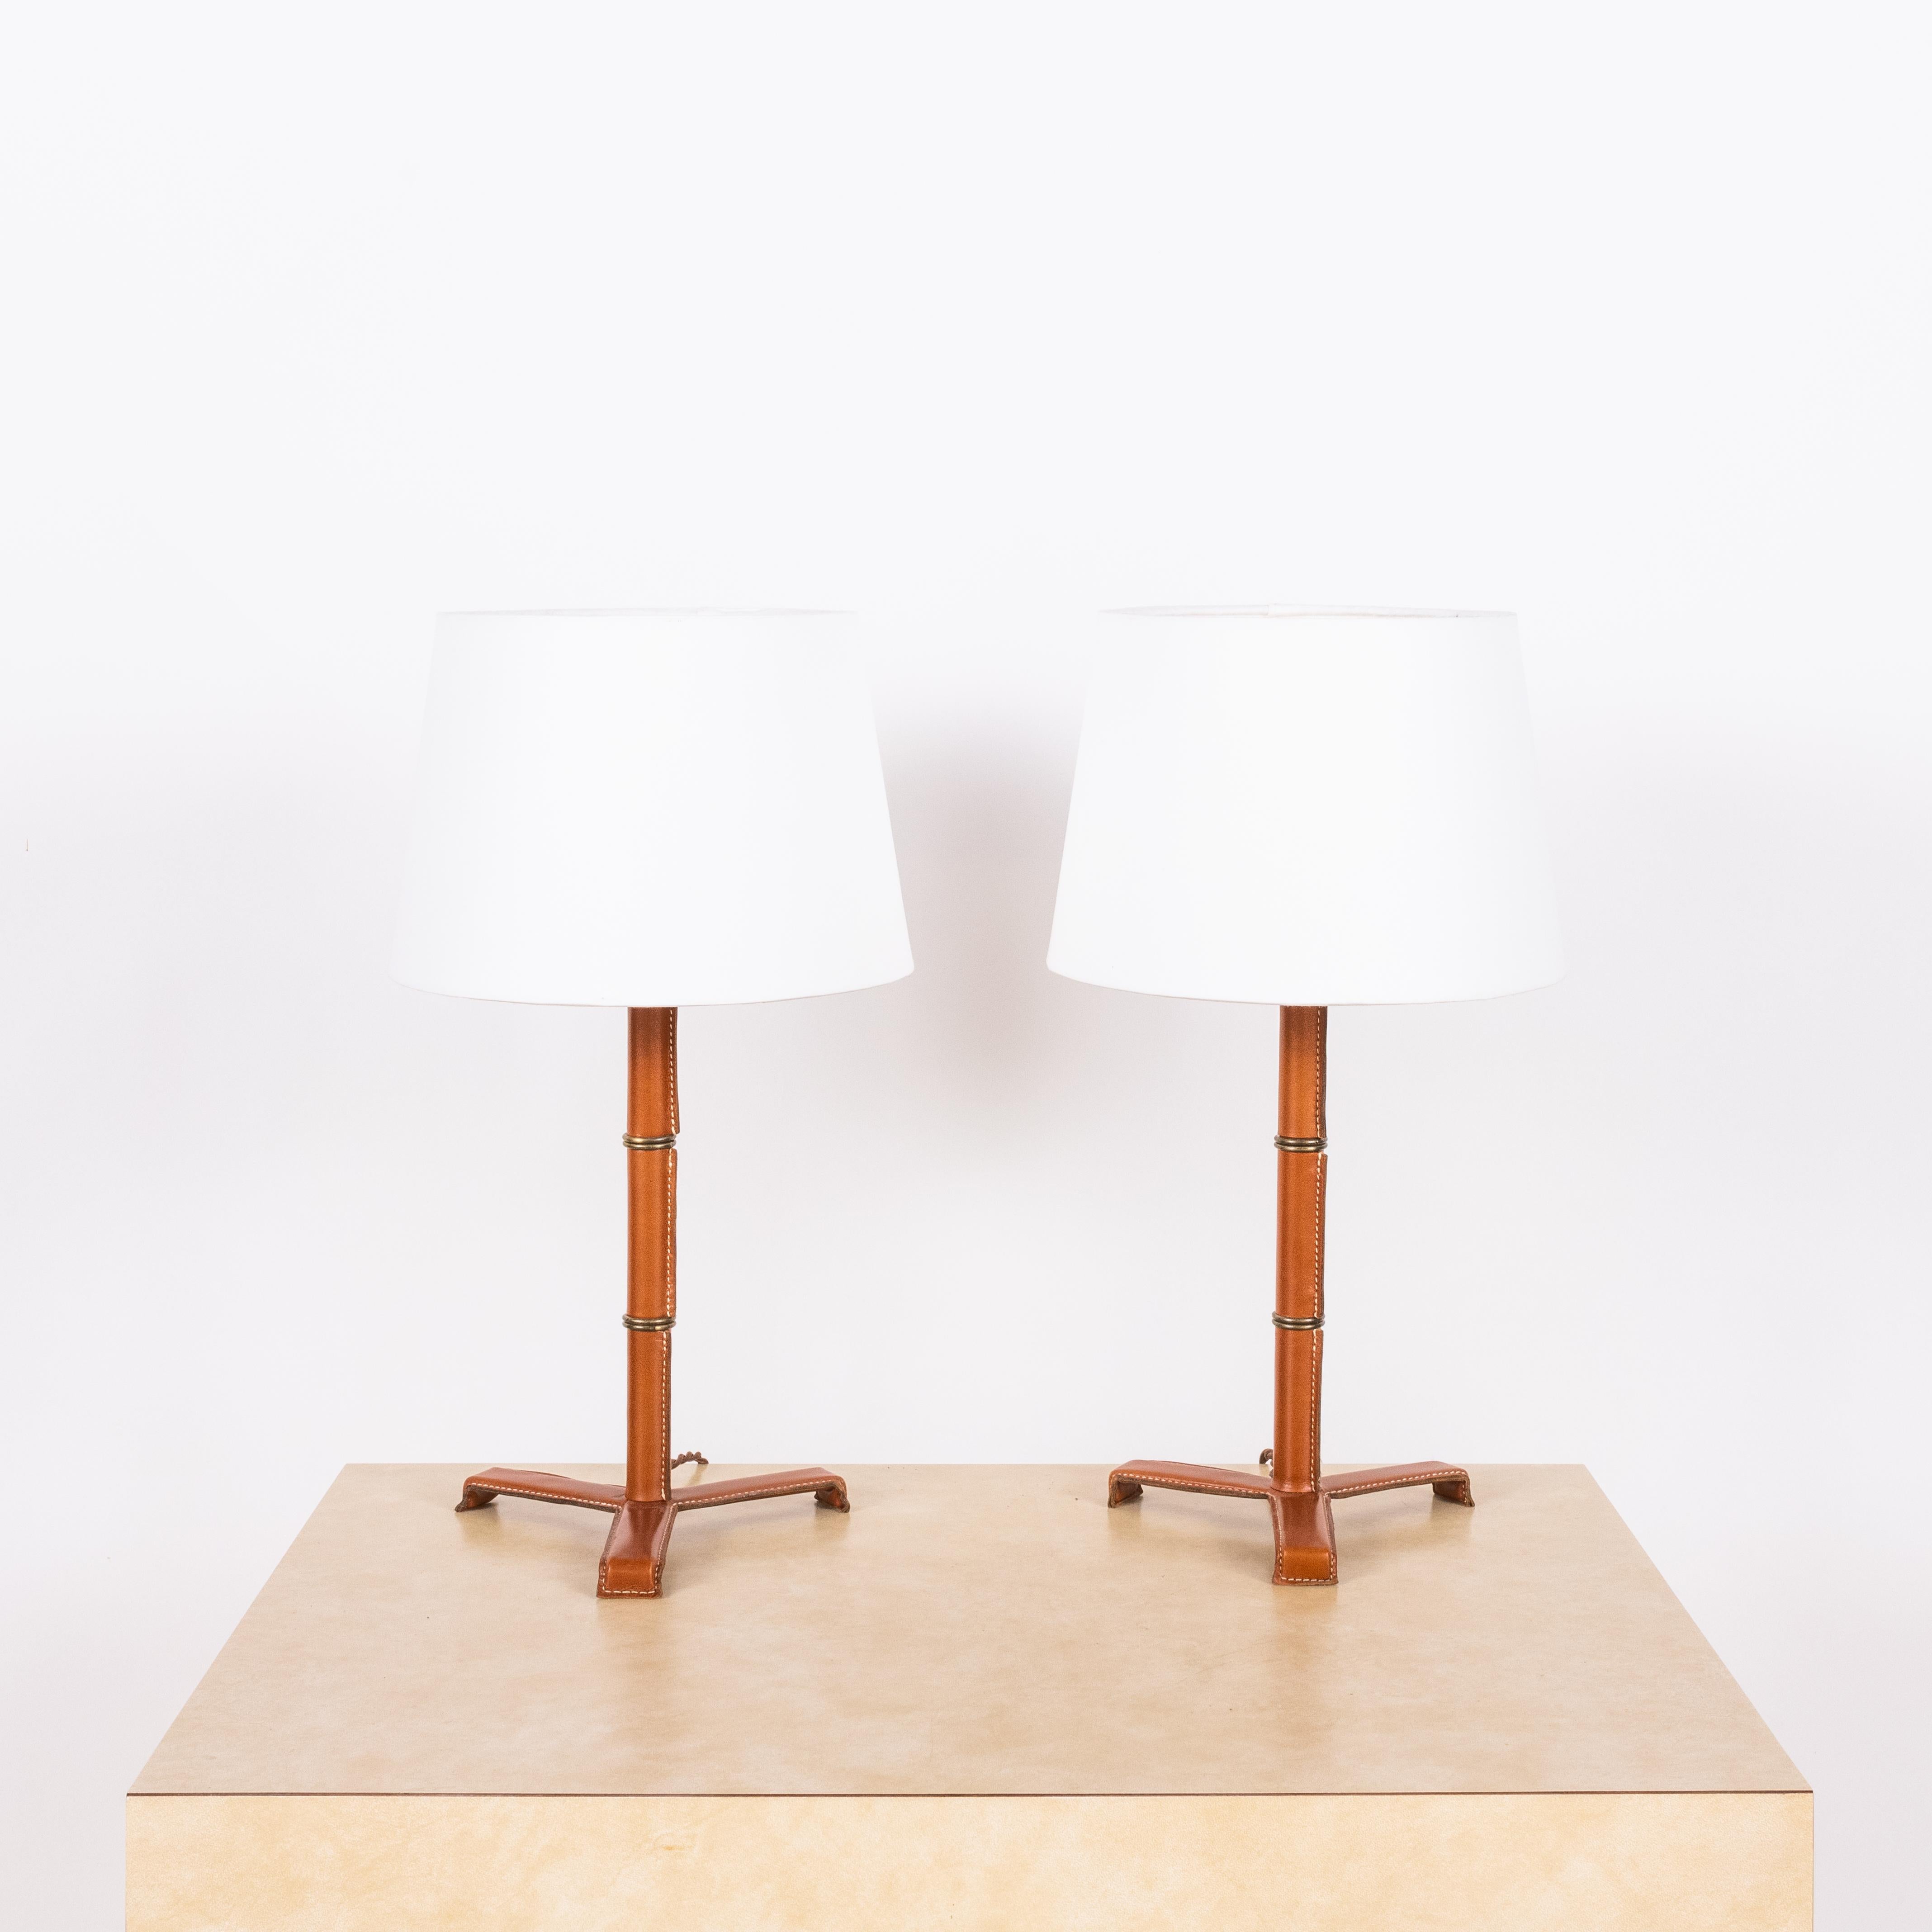 Introducing the 'Sellier' French modernist-style stitched tan leather table lamps by Design Frères.

Crafted from premium black leather, the stitched detailing adds a touch of sophistication, while the parchment paper shade emits a warm and inviting